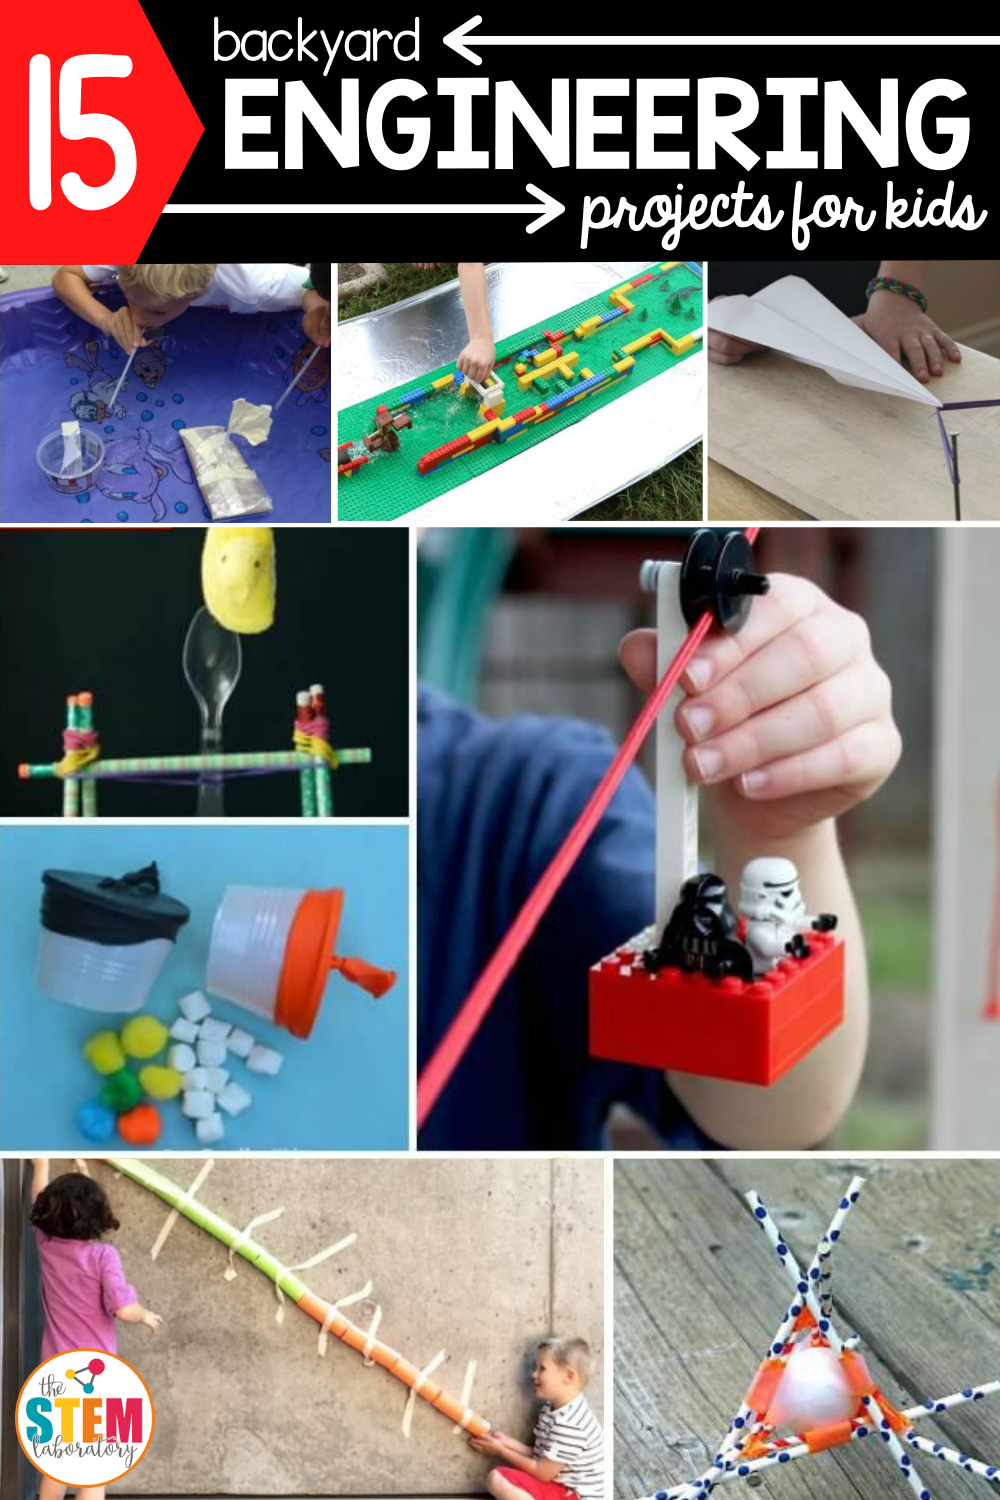 15 Backyard Engineering Projects for Kids